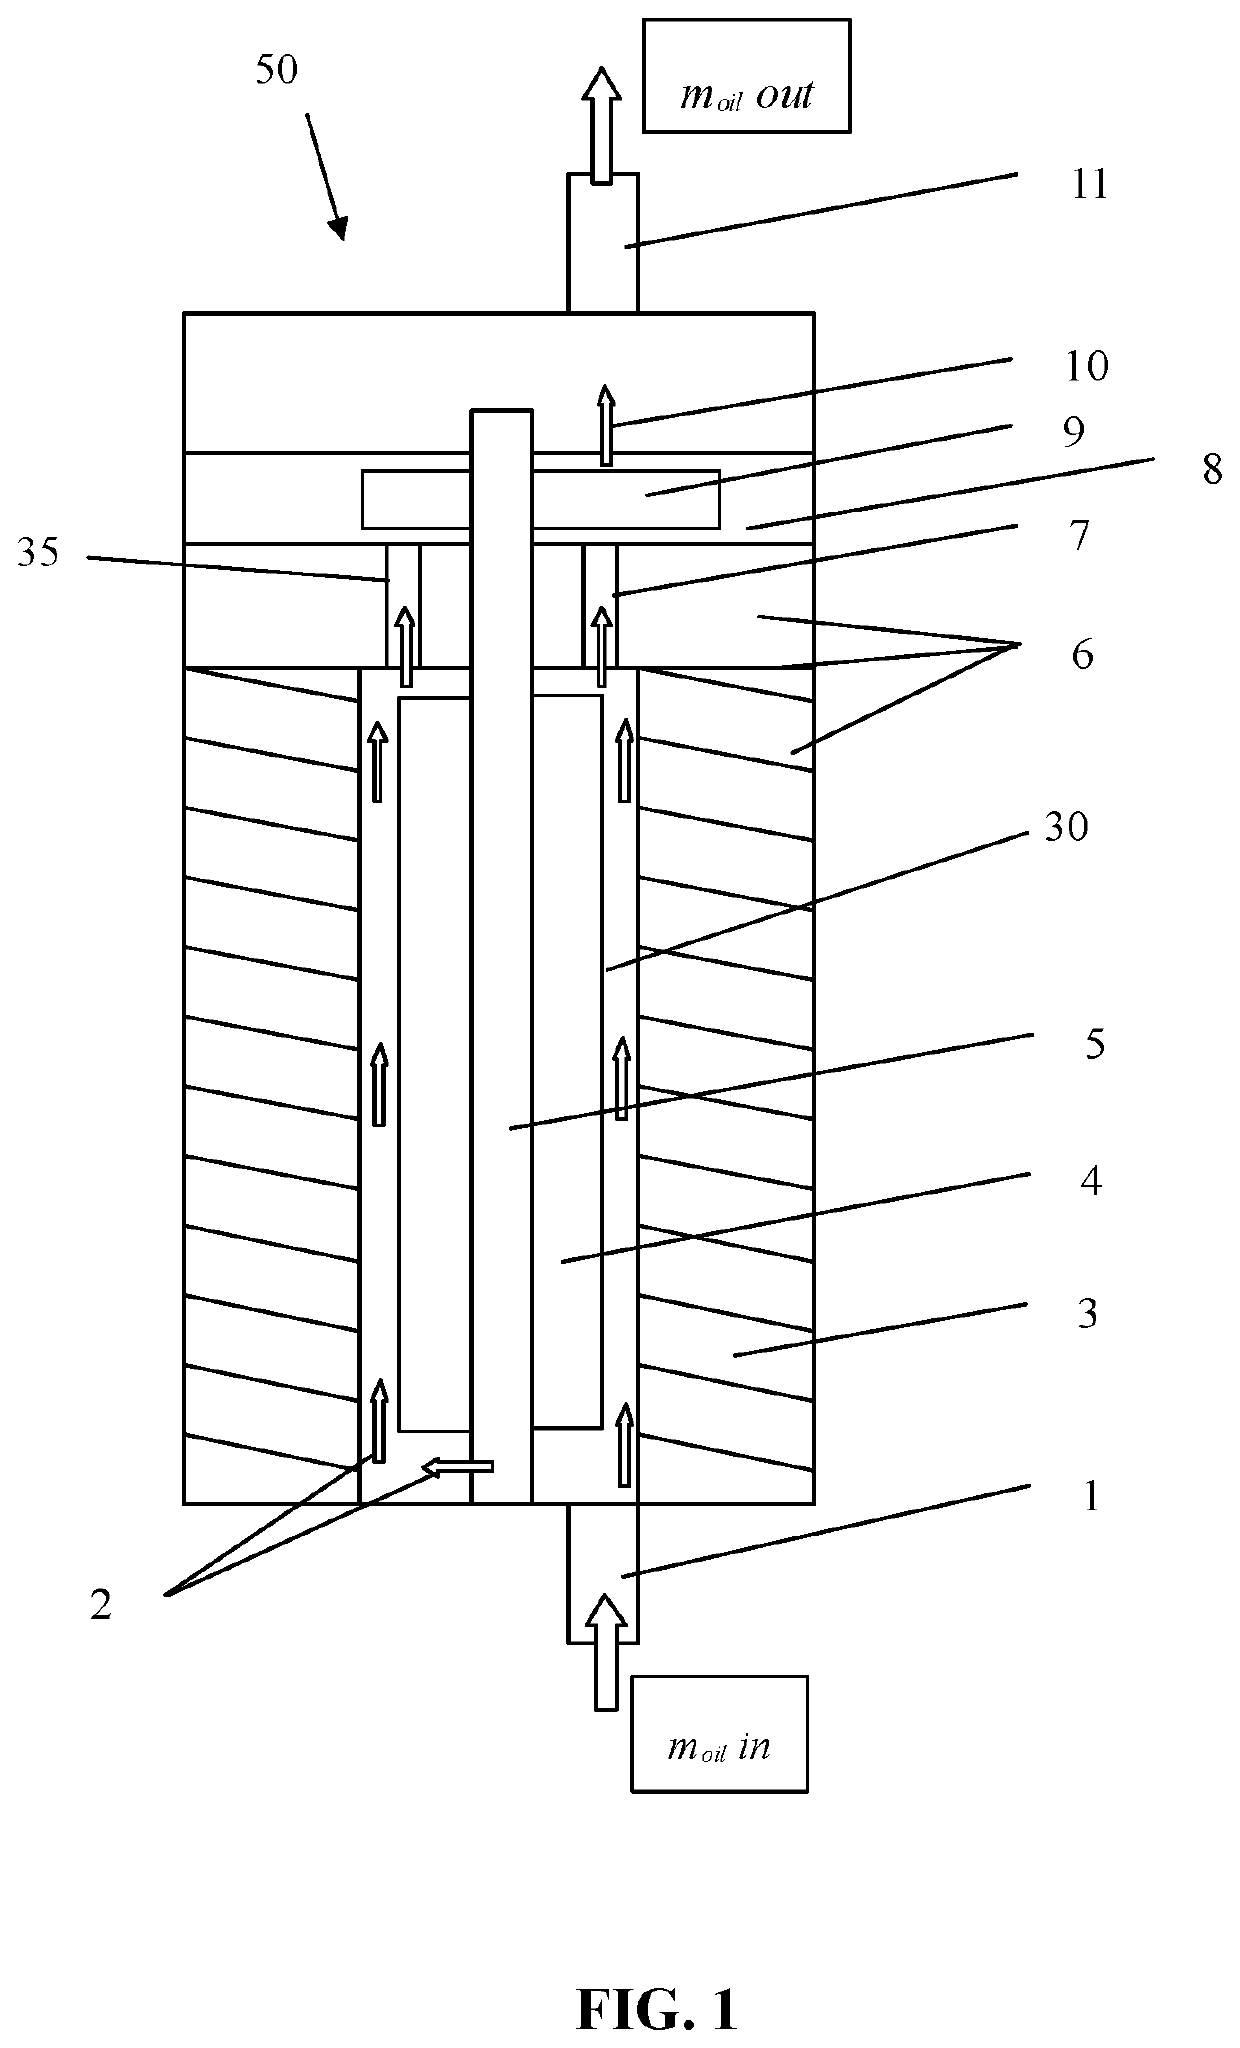 Method and apparatus for orientation independent compression